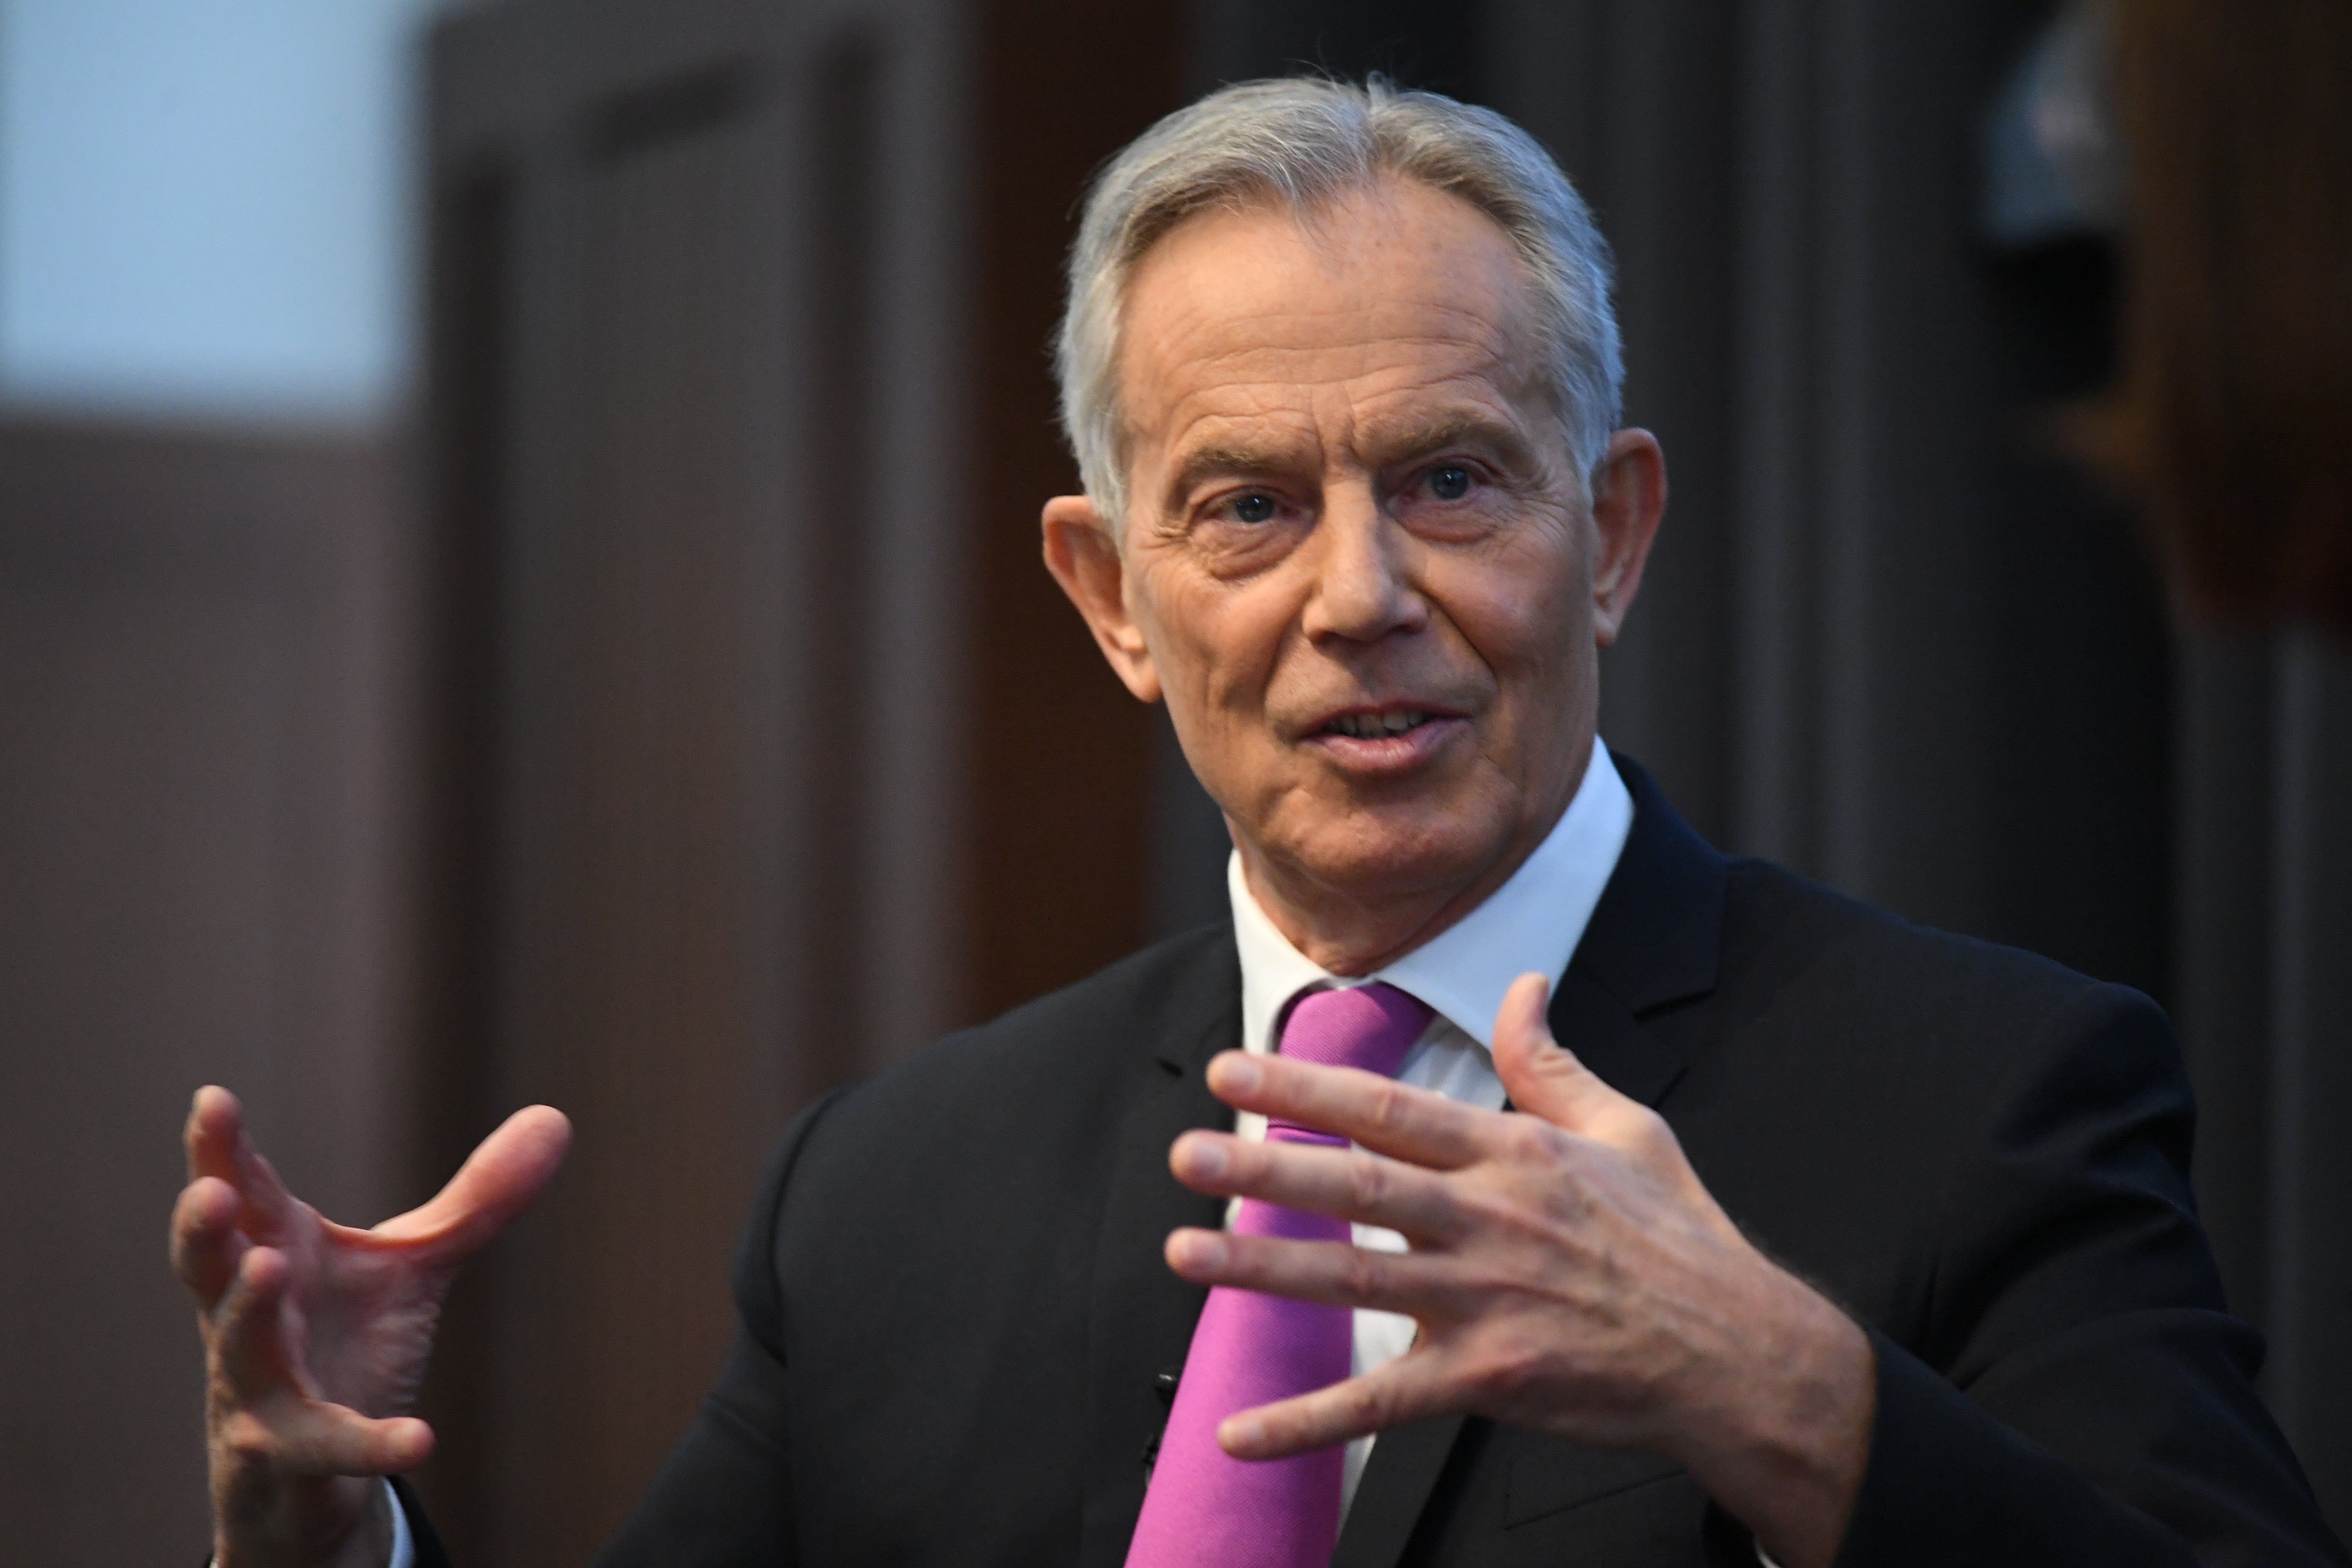 Tony Blair said that ‘there’s a group of people who maybe backed the Tories for the first time who are having second thoughts’